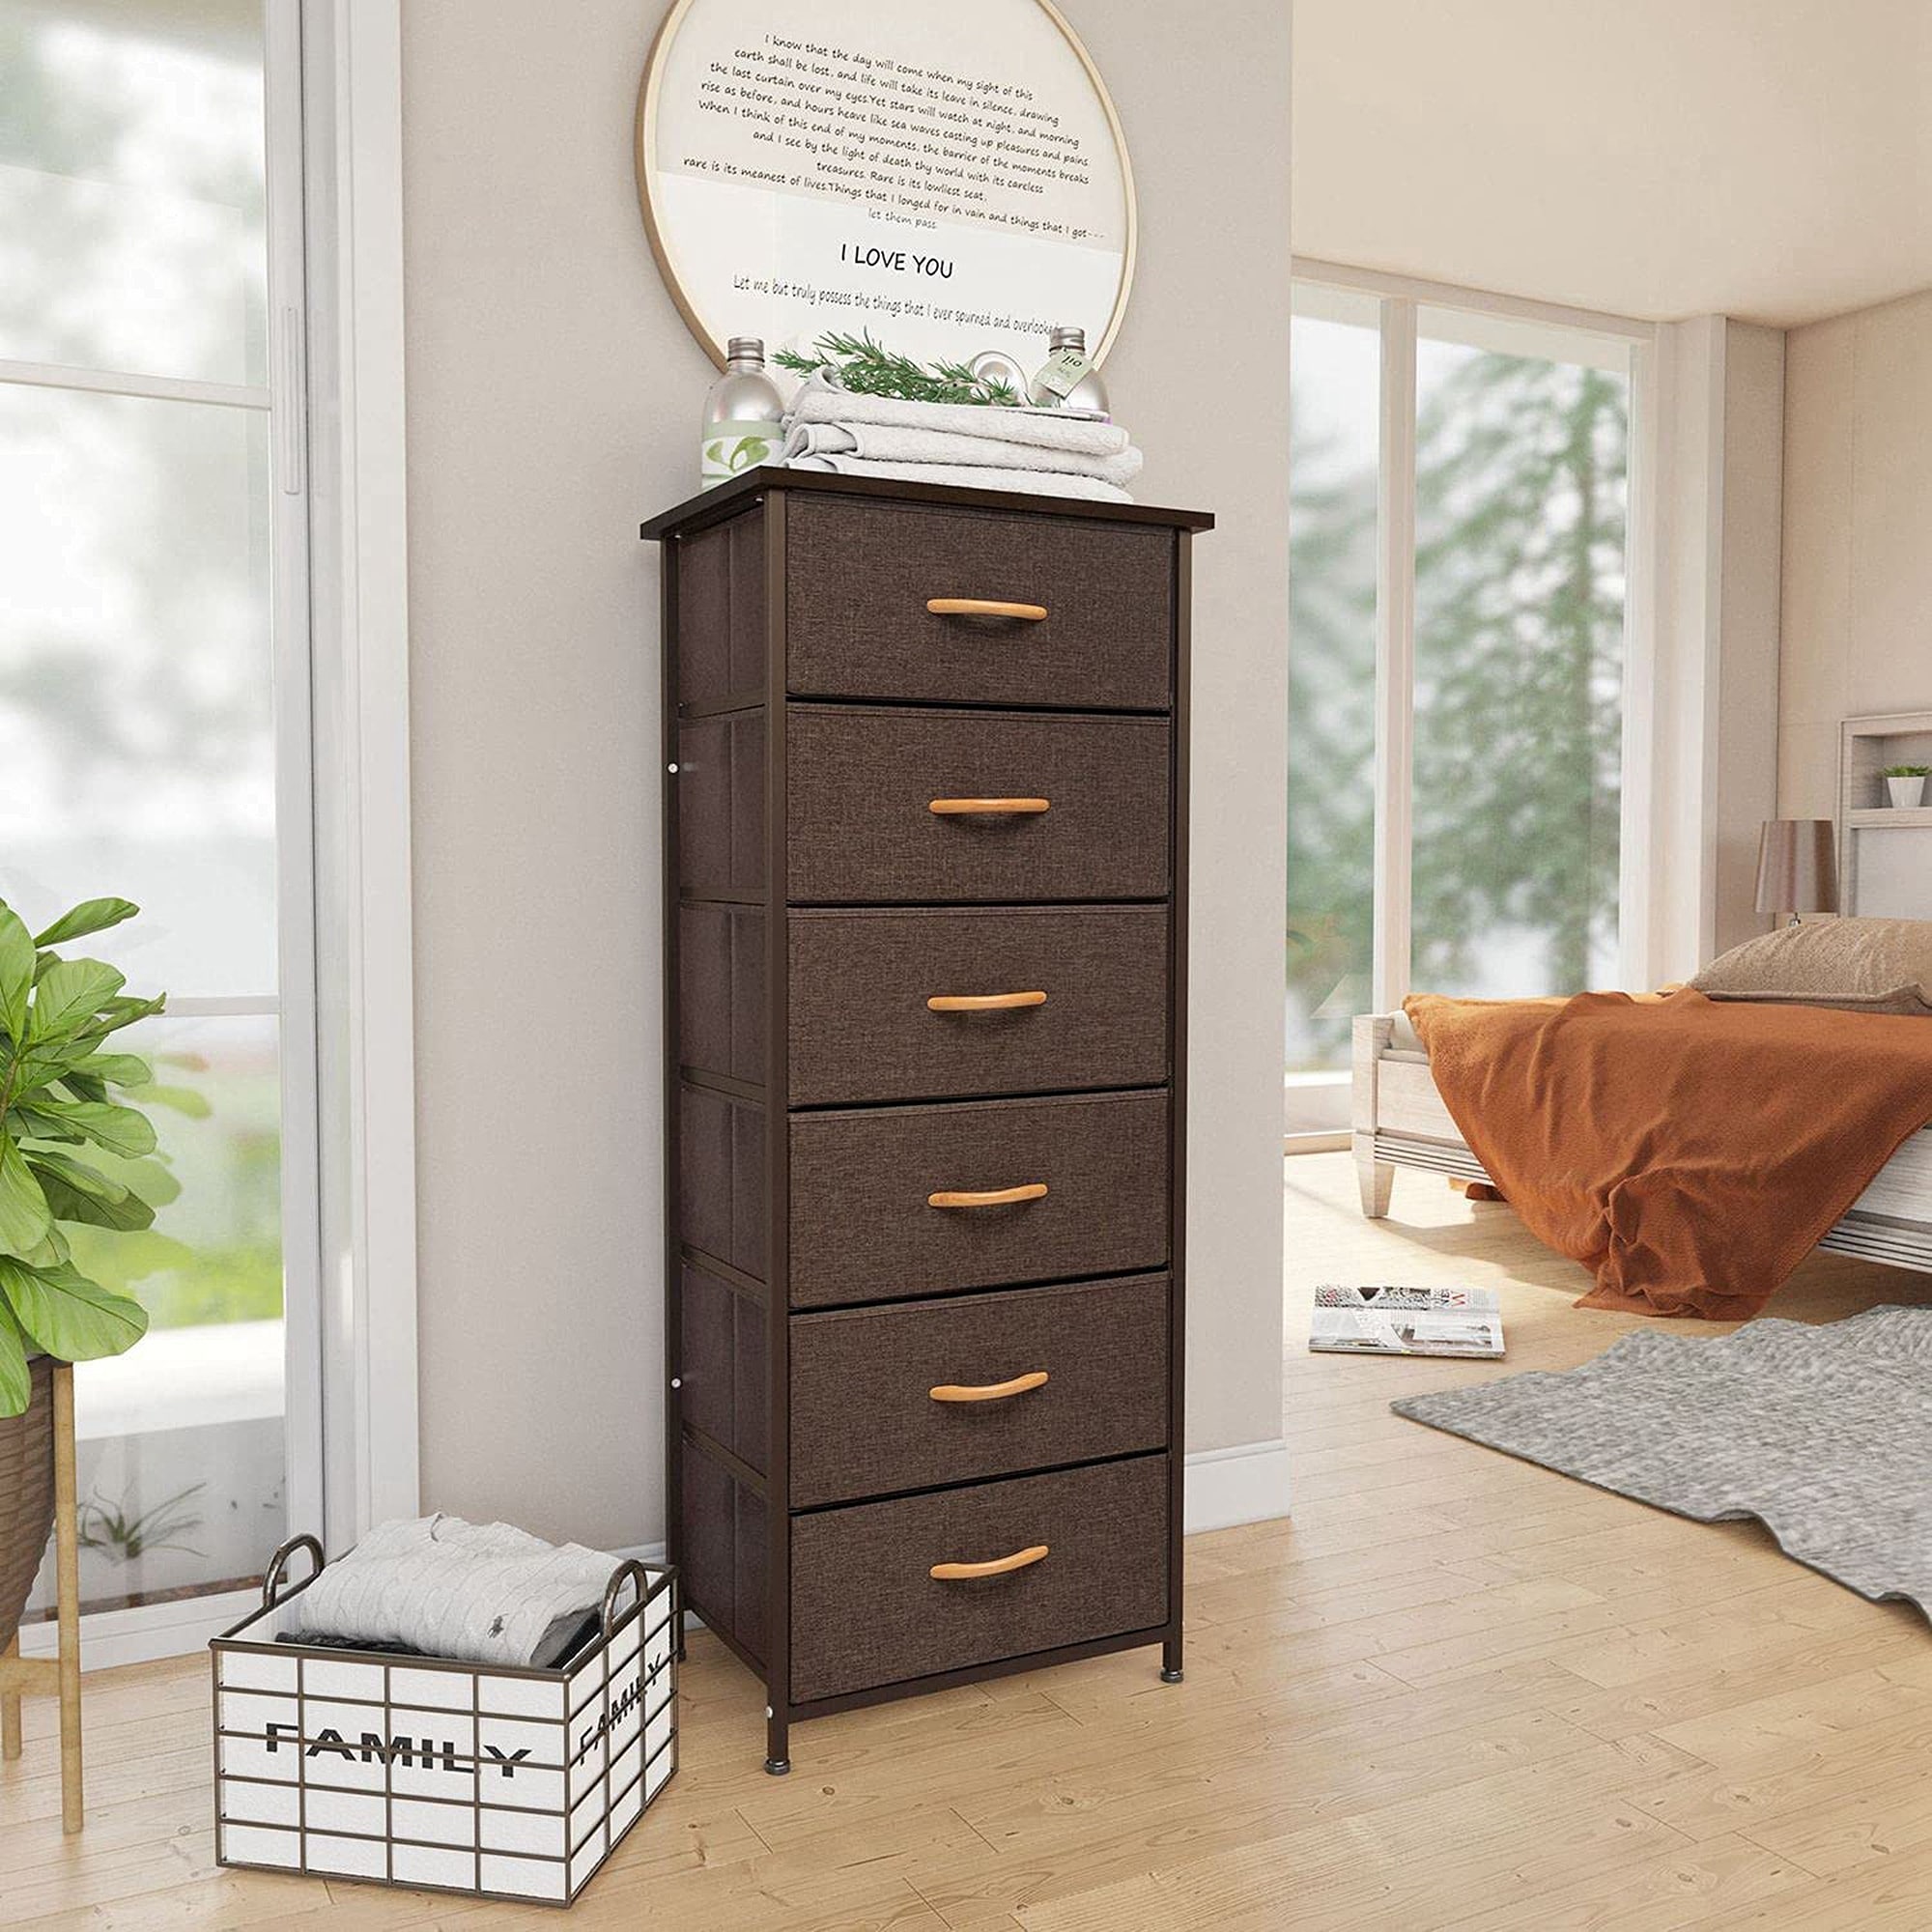 https://ak1.ostkcdn.com/images/products/is/images/direct/57783ff323fbb8089e1aeaebe7db4384b0a8e82c/6-Drawers-Dresser%2C-Tall-Dresser-Vertical-Storage-Tower-with-Wooden-Handle-and-Wooden-Top.jpg